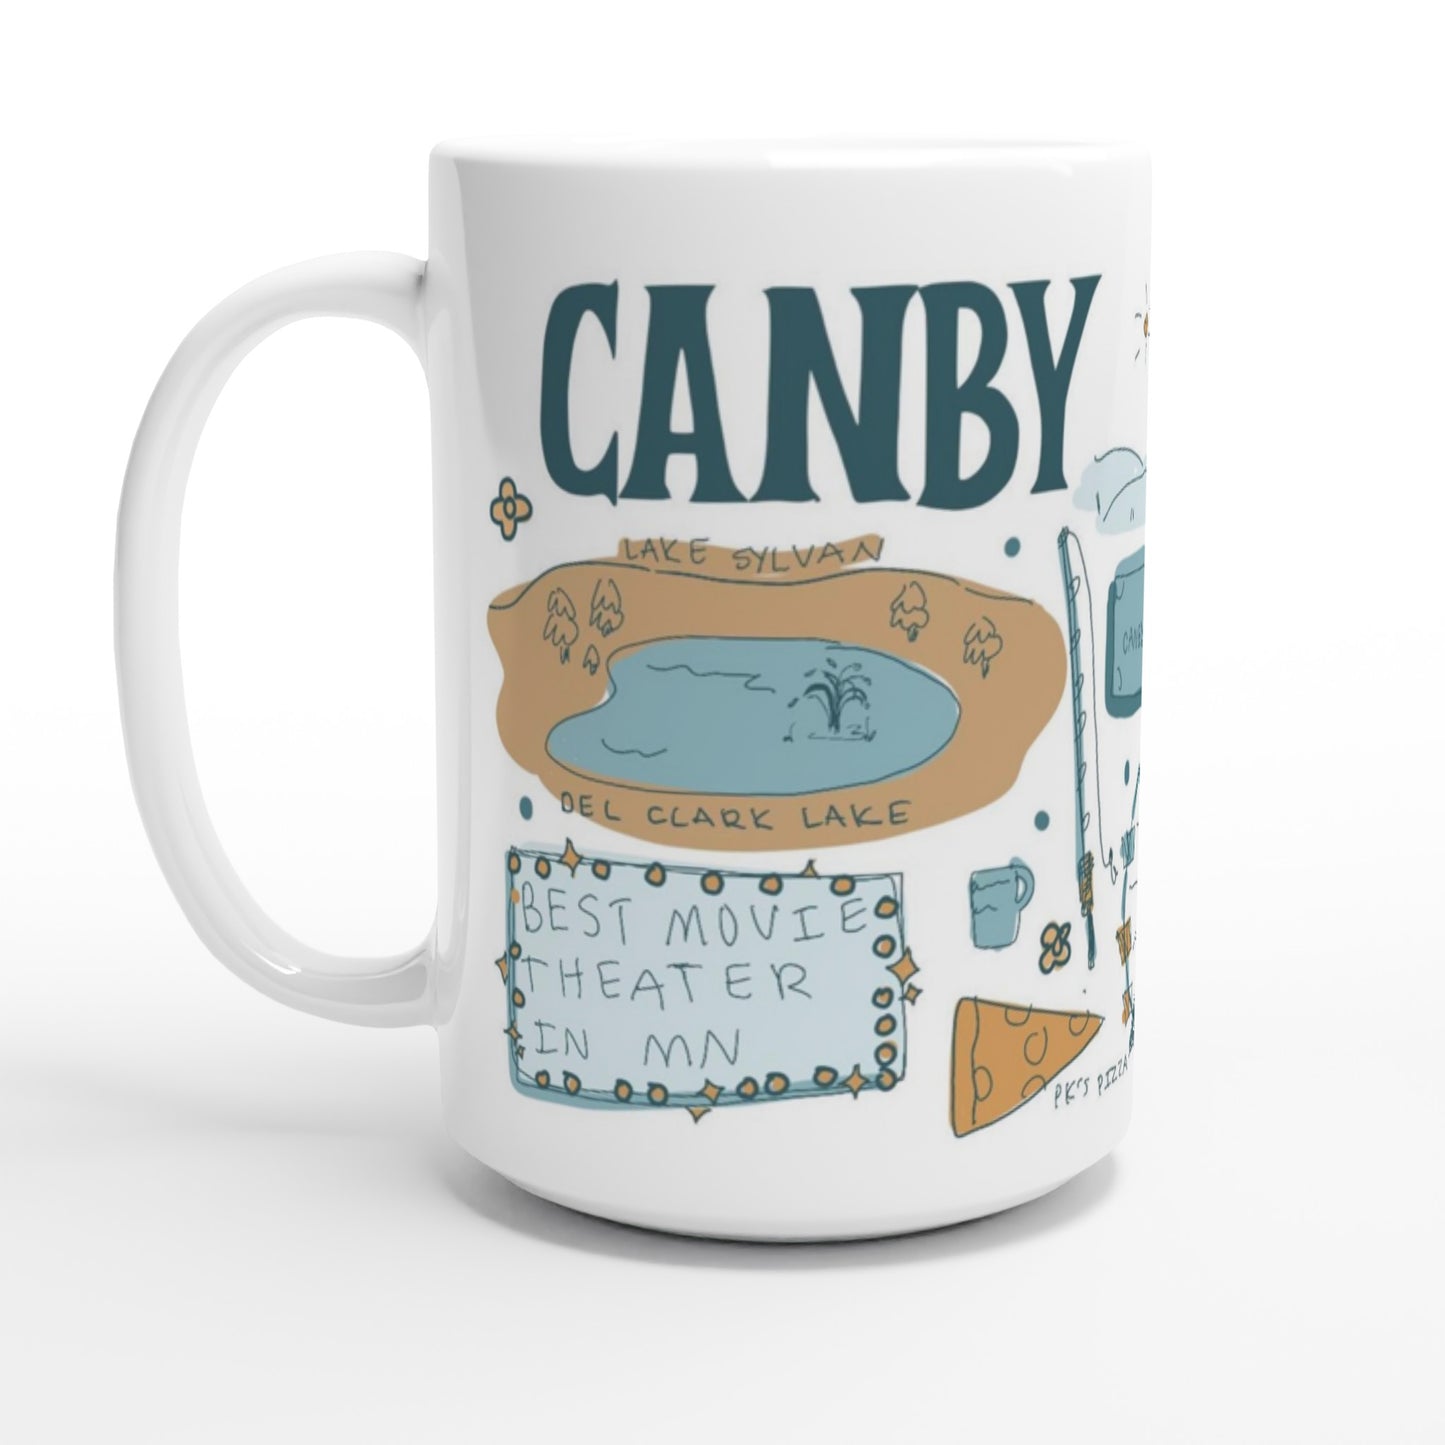 Canby, 2nd version